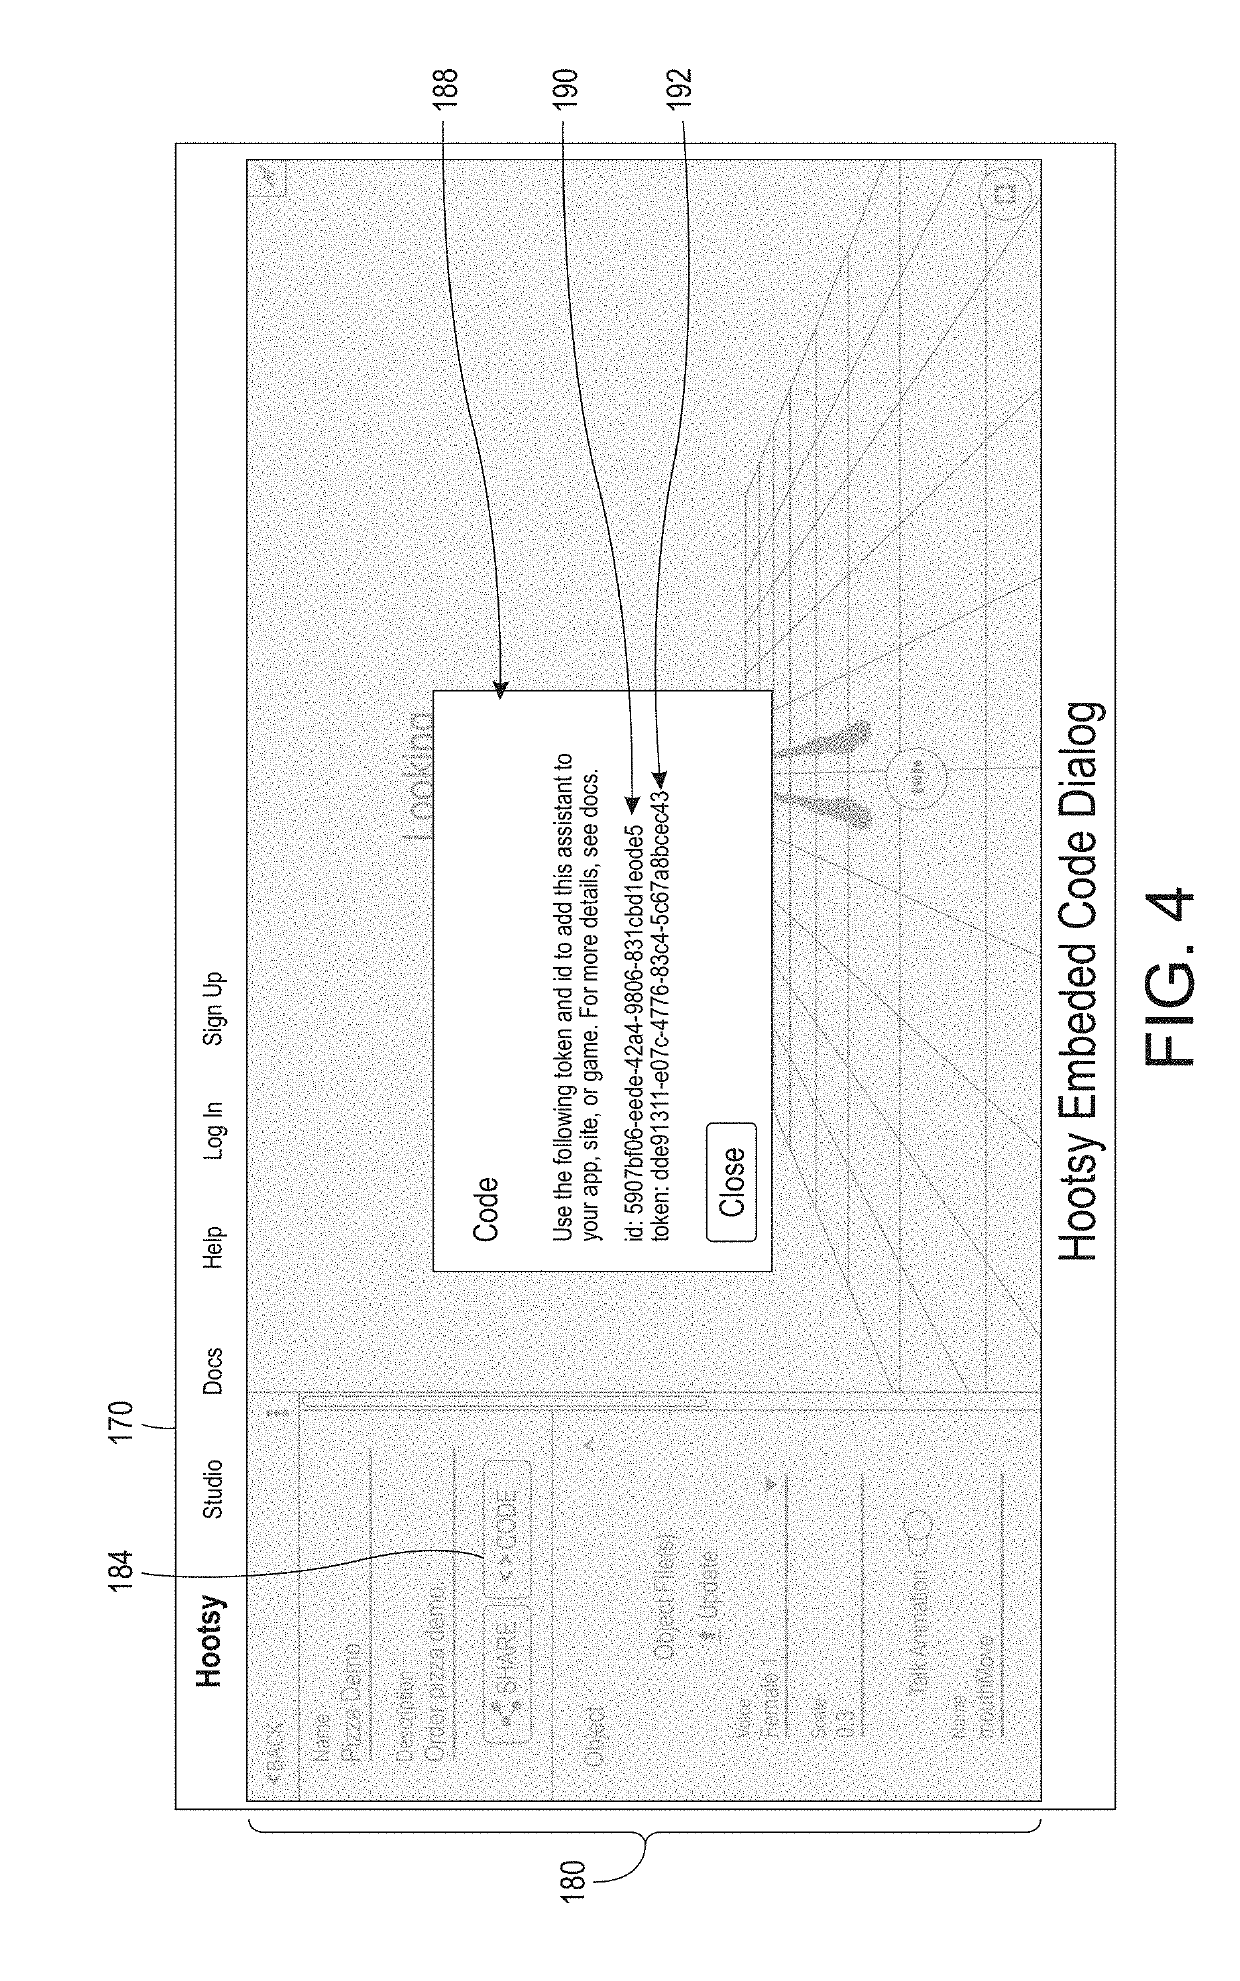 System and method for cross-platform sharing of virtual assistants